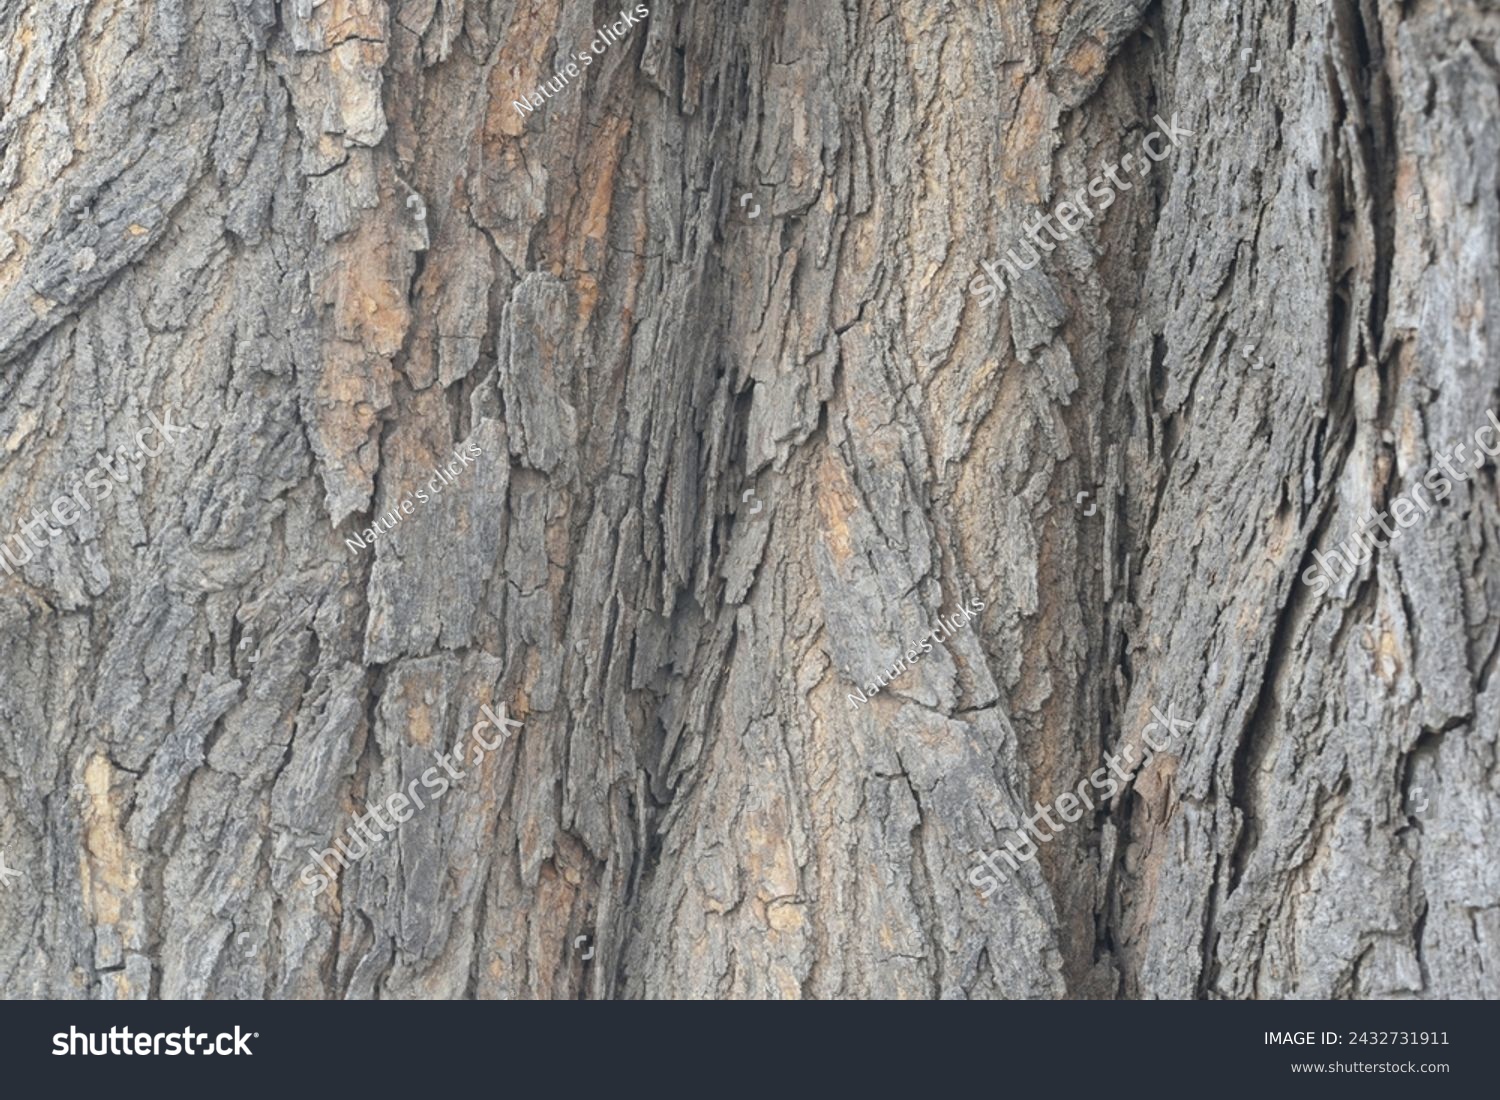 Old tree texture. Bark pattern, For background wood work, Bark of brown hardwood, thick bark hardwood, residential house wood. nature, tree, bark, hardwood, trunk, tree , tree trunk close up texture #2432731911